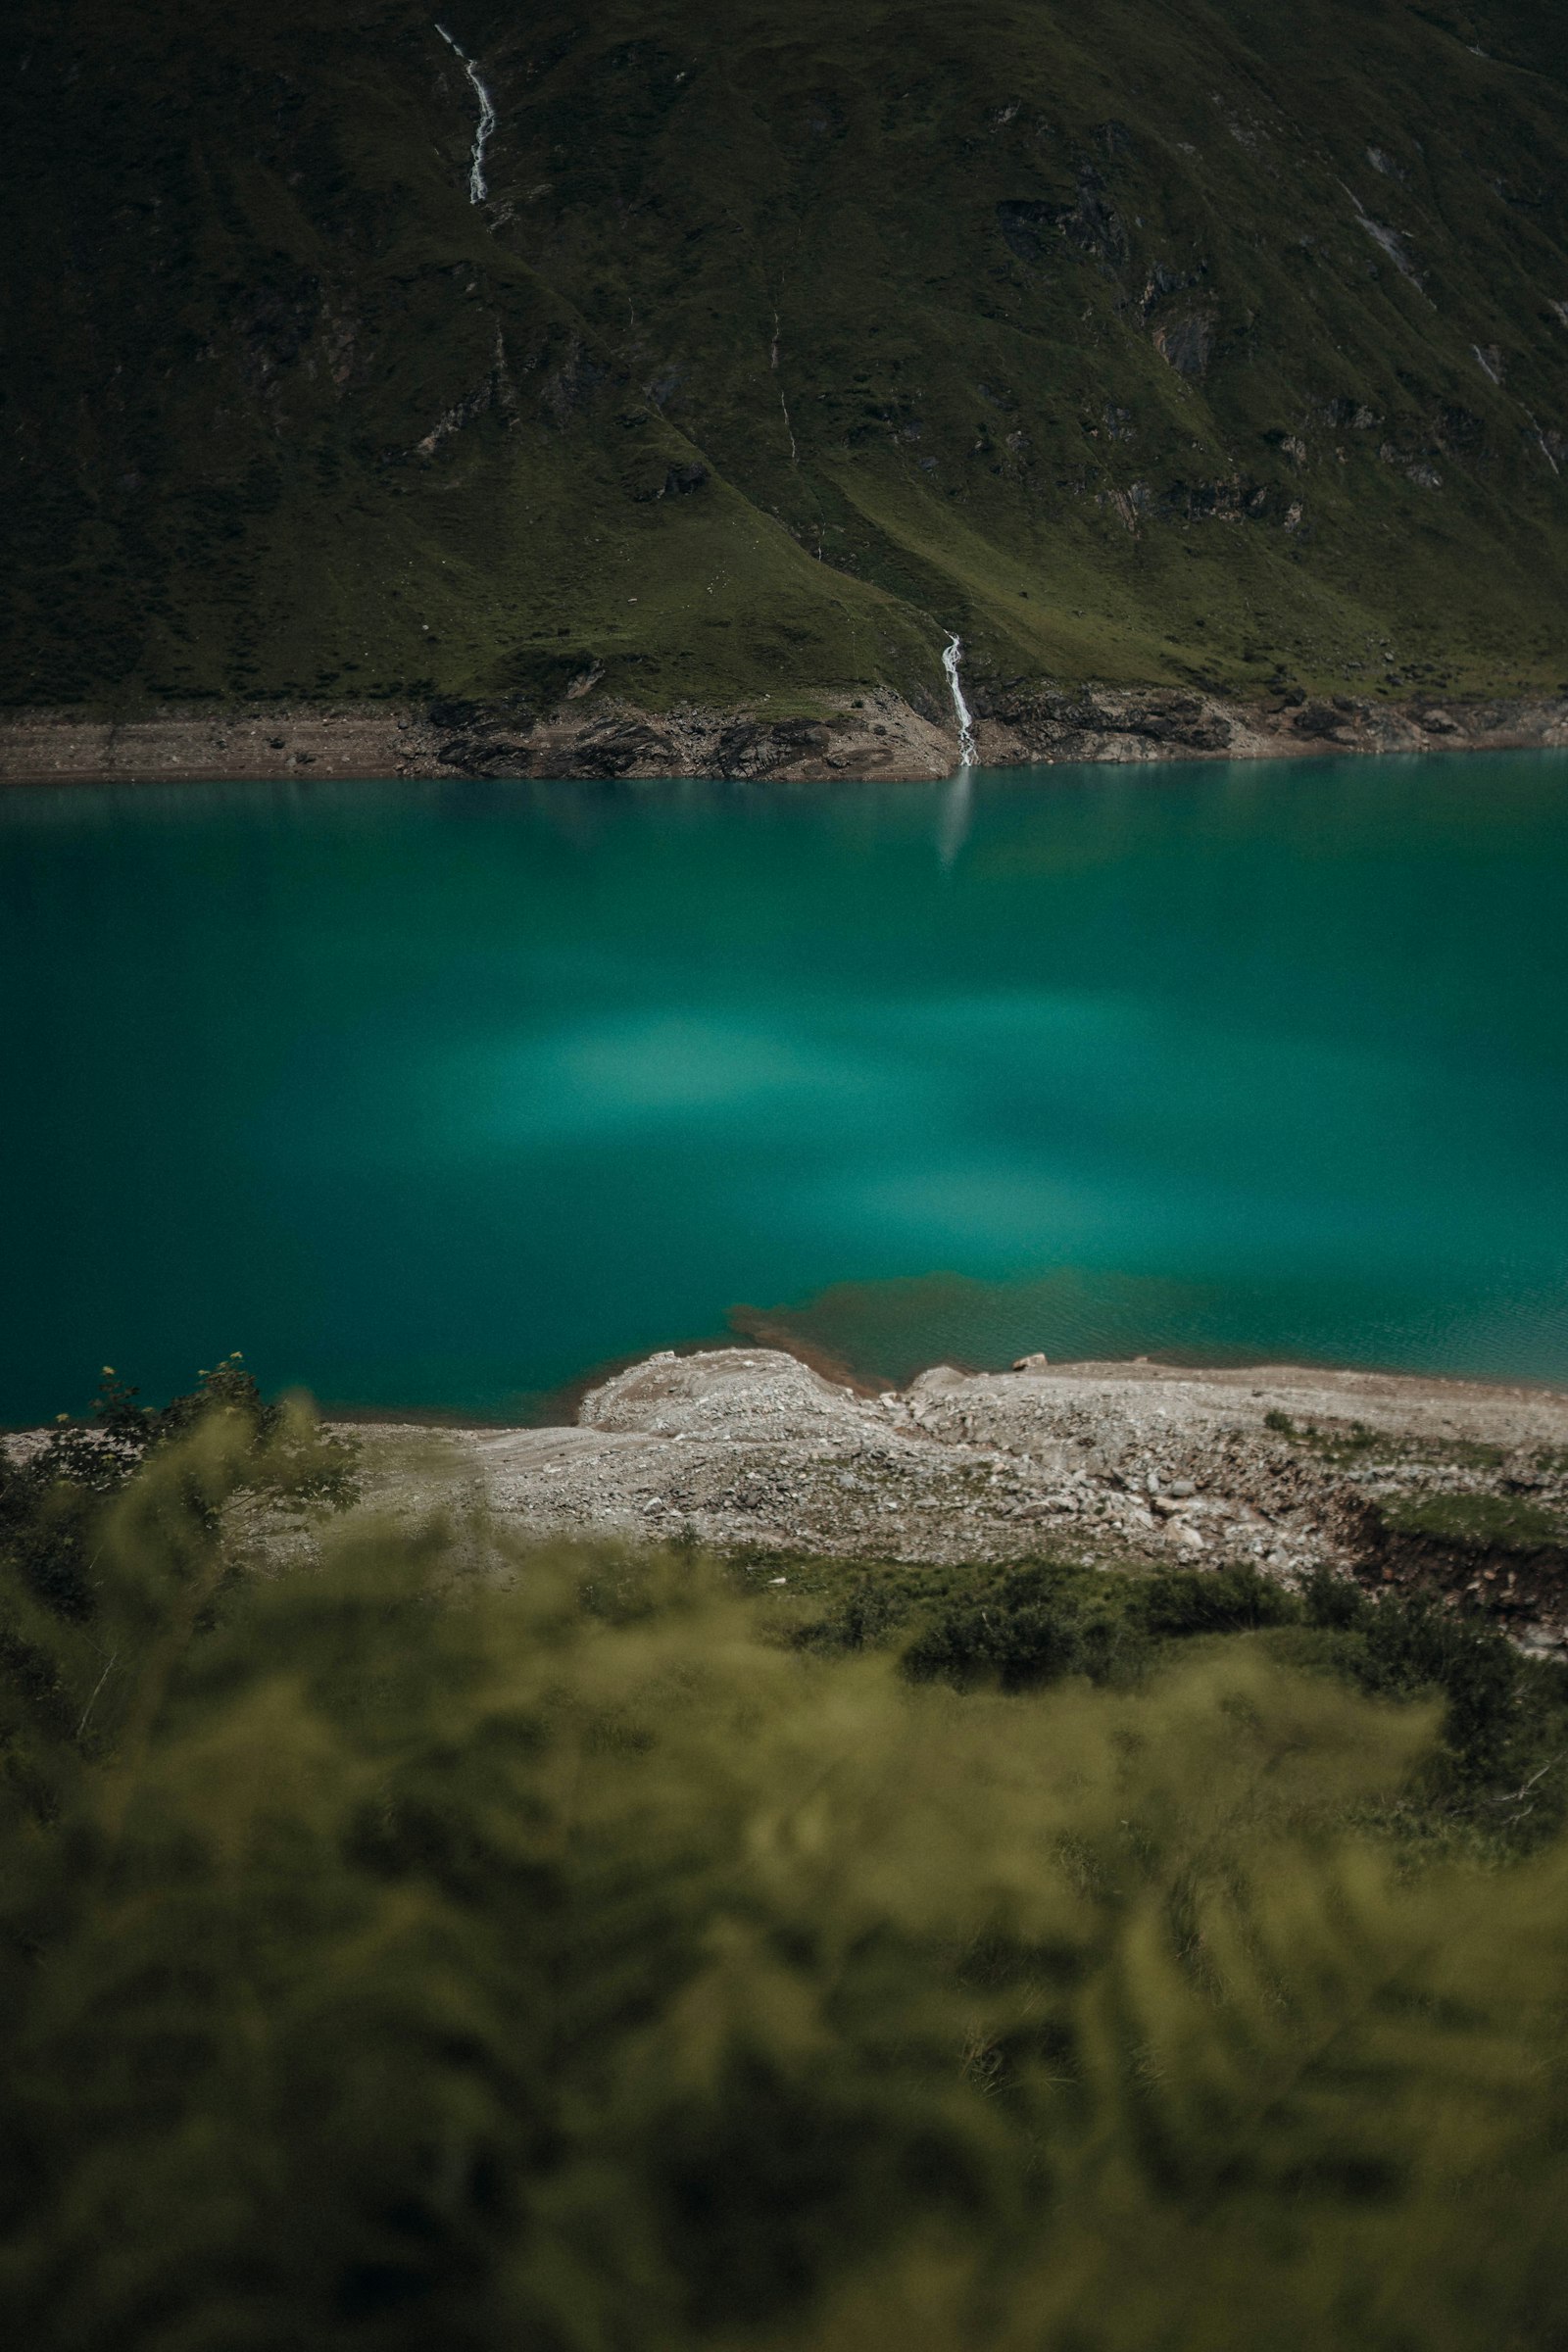 Sony a7 III + Sigma 35mm F1.4 DG HSM Art sample photo. Blue lake surrounded by photography